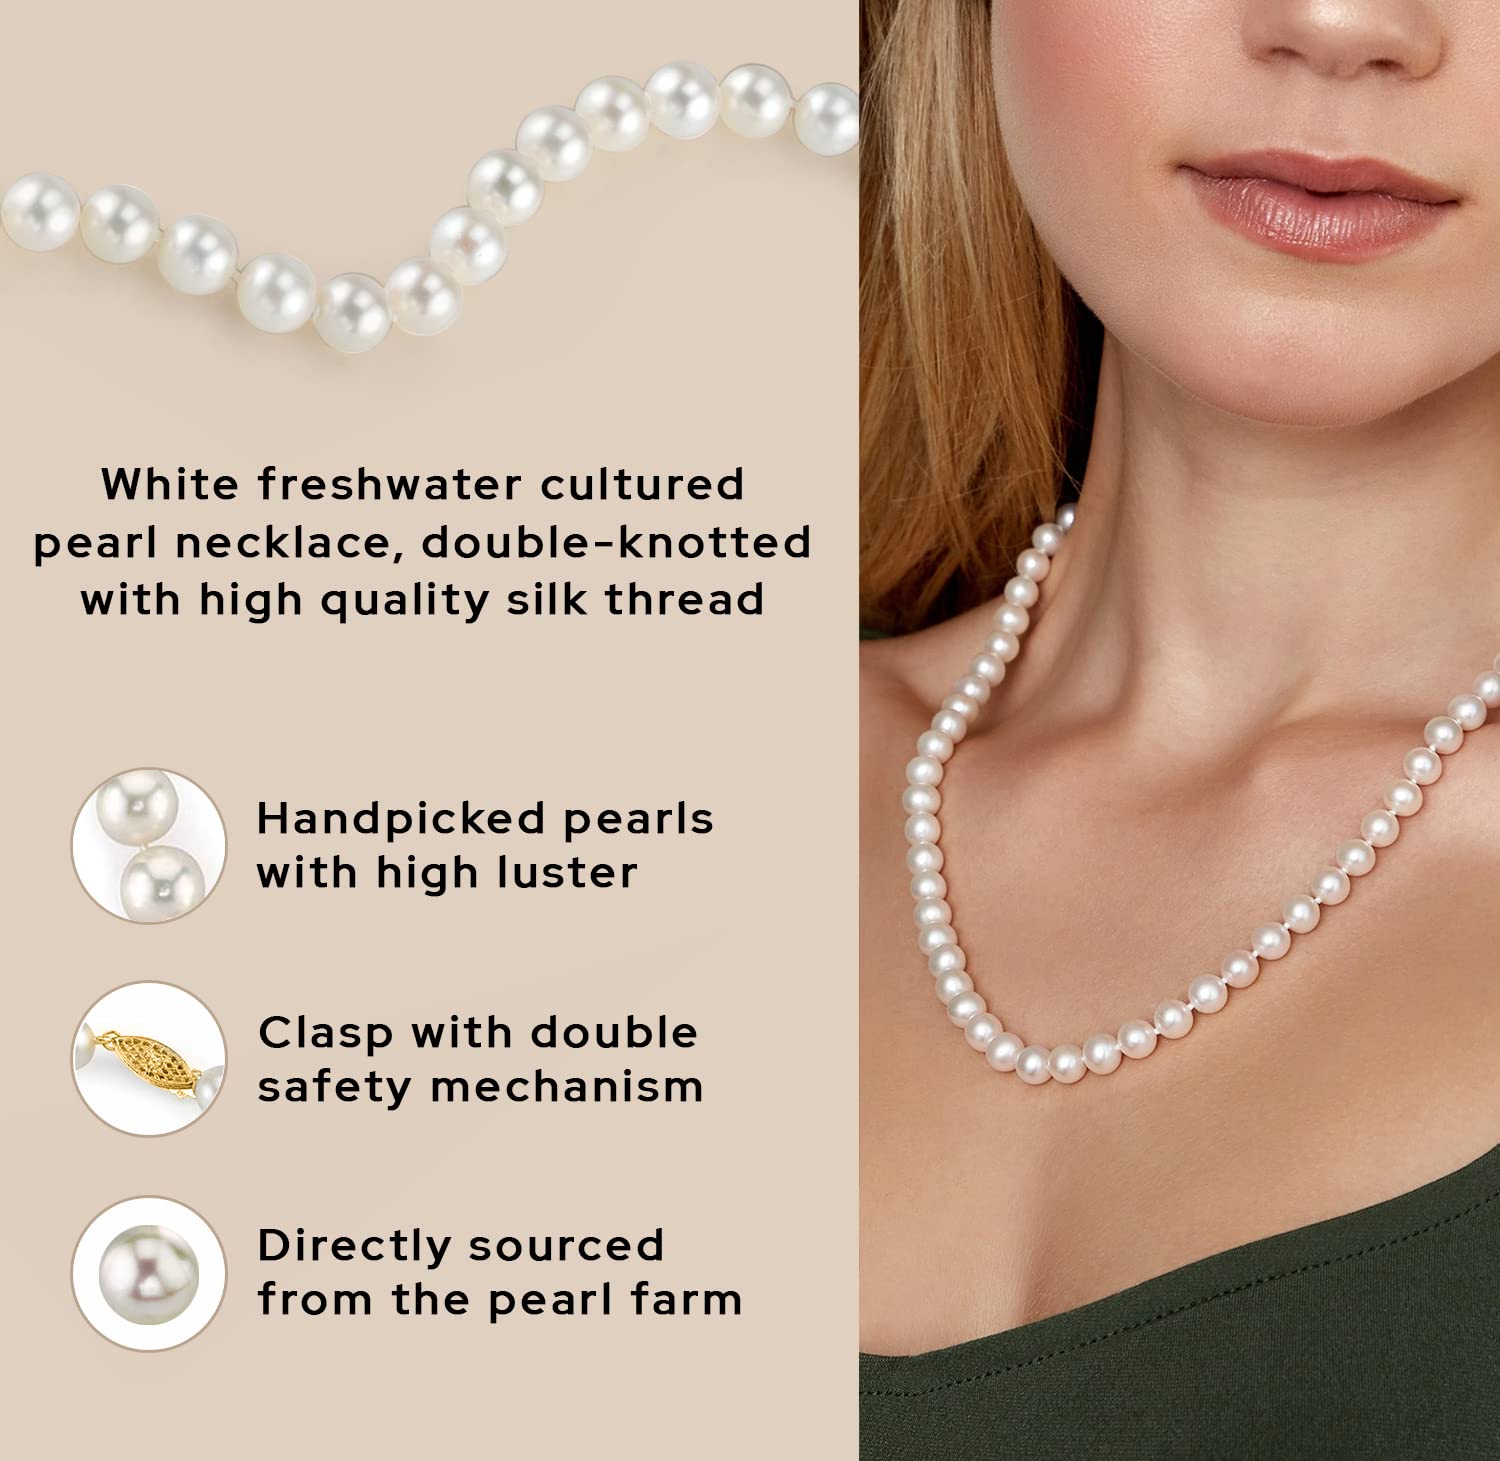 The Pearl Source Real Pearl Necklace for Women with AAA+ Quality Round White Freshwater Genuine Cultured Pearls | 18 inch Pearl Strand with 14K Gold Clasp